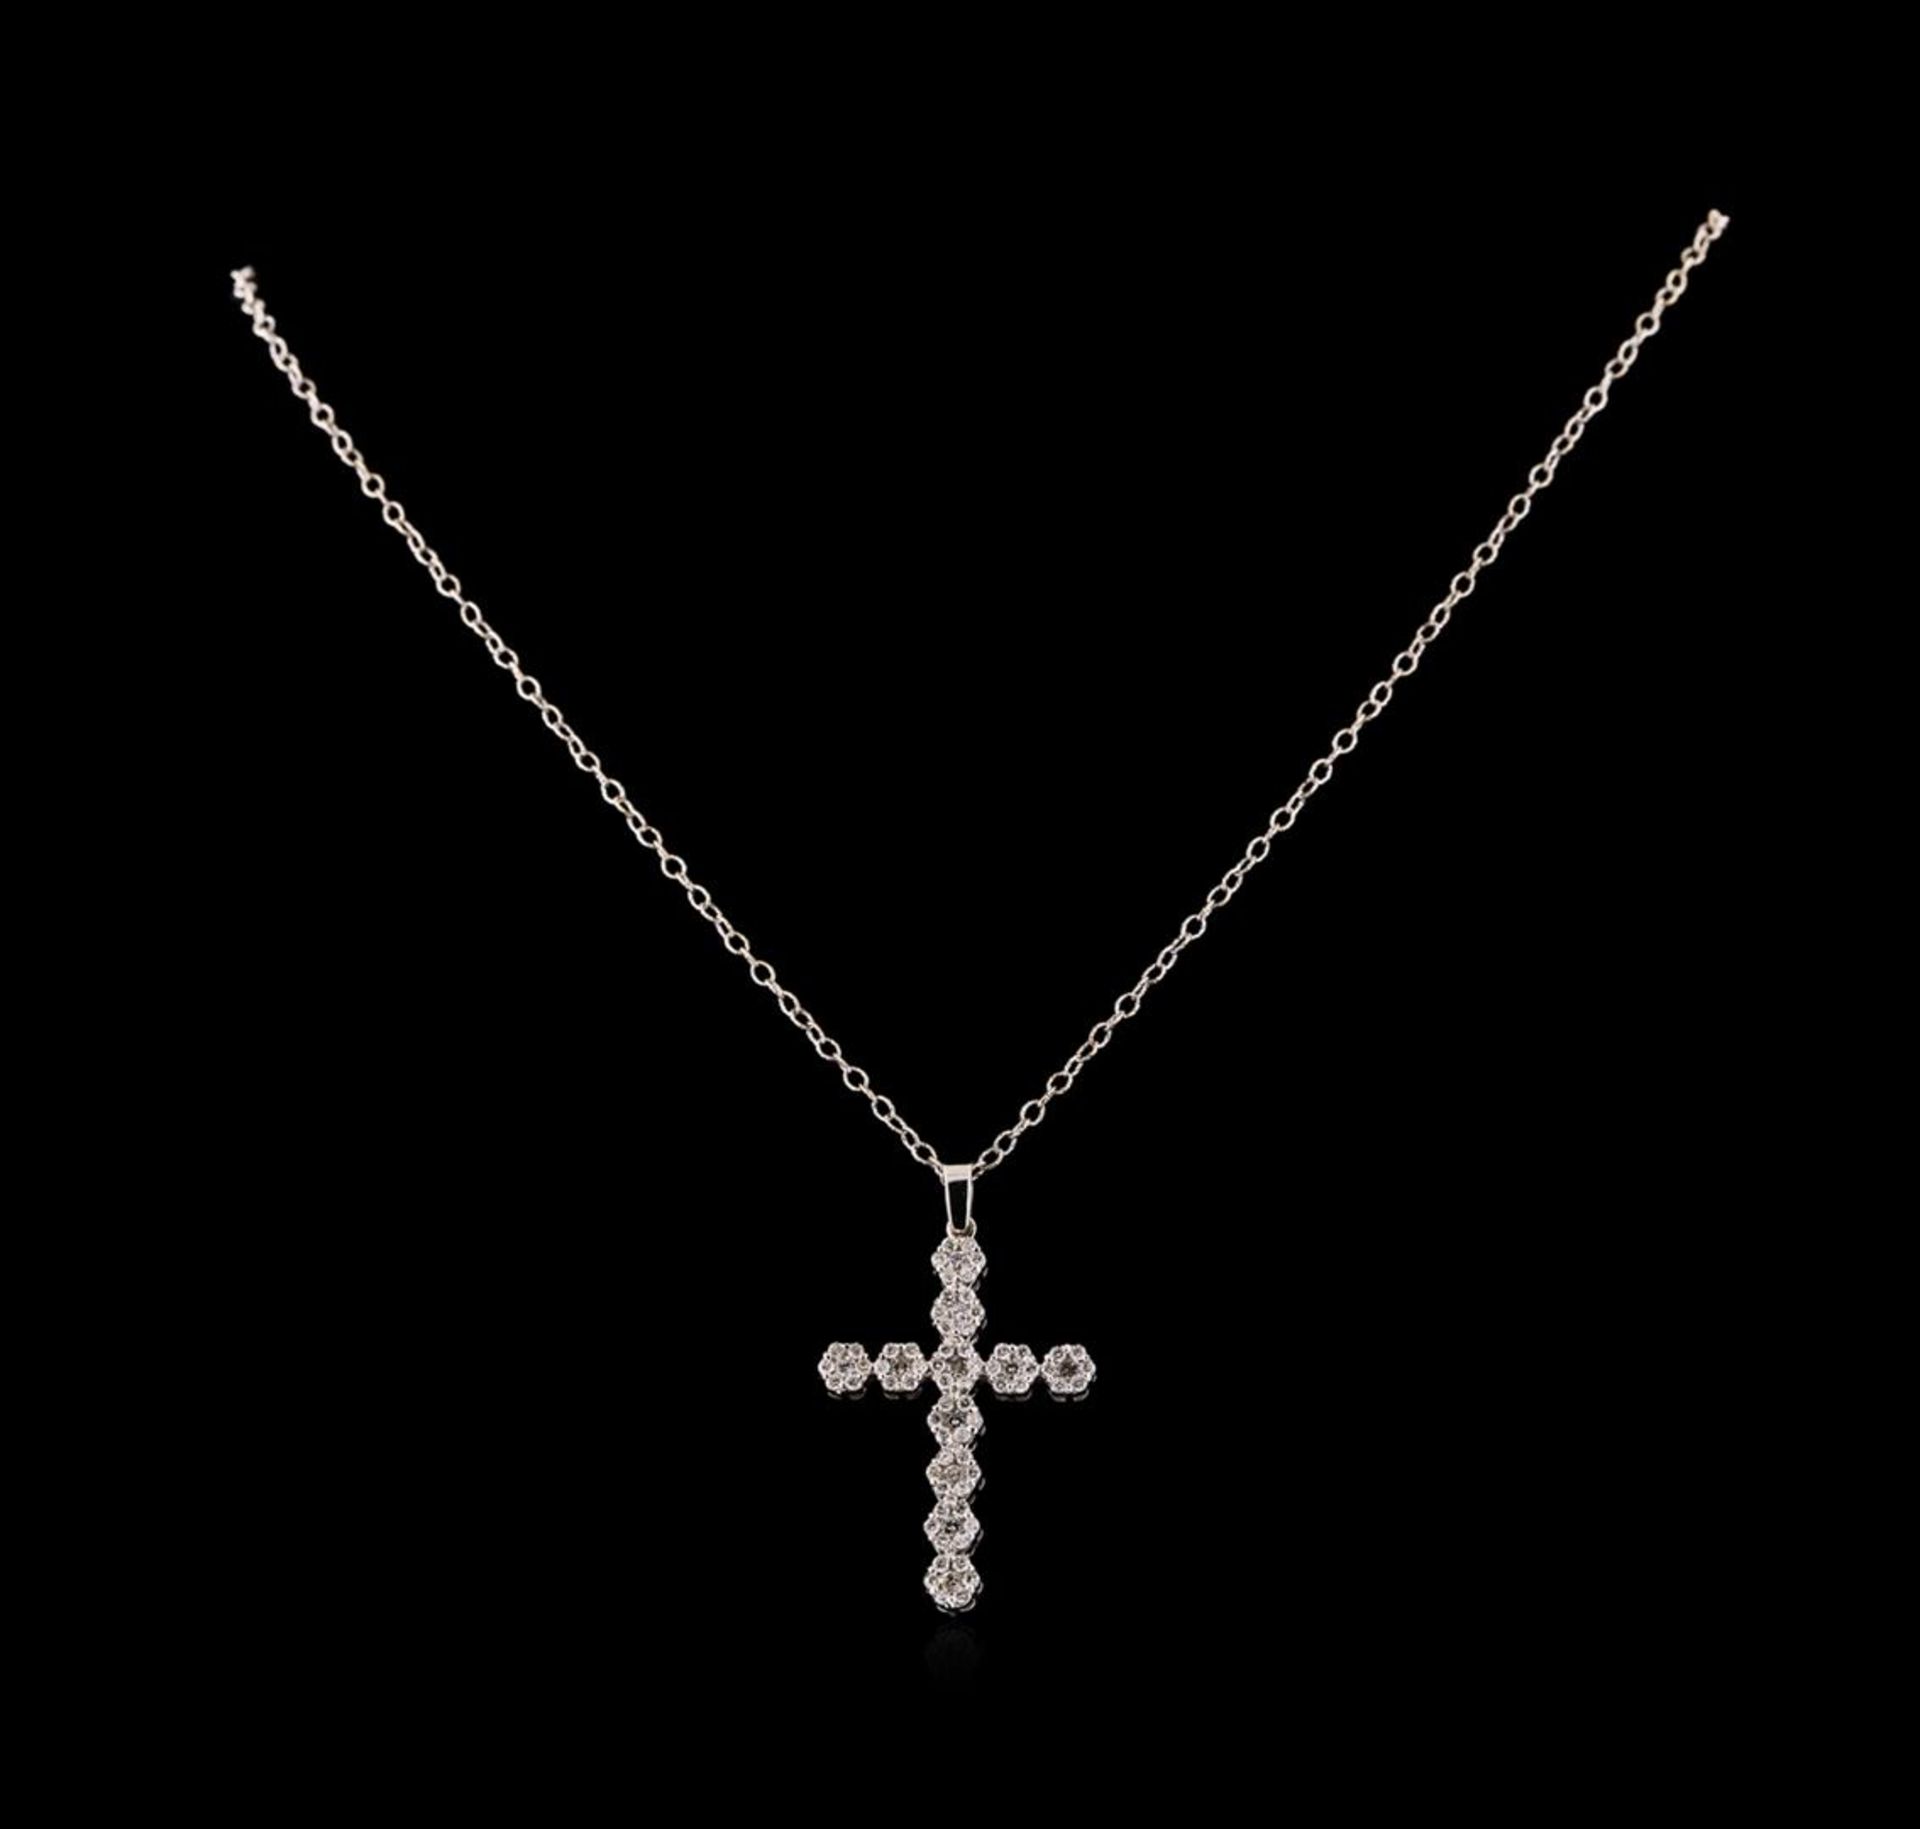 1.03 ctw Diamond Pendant With Chain - 14KT White Gold - Image 2 of 2